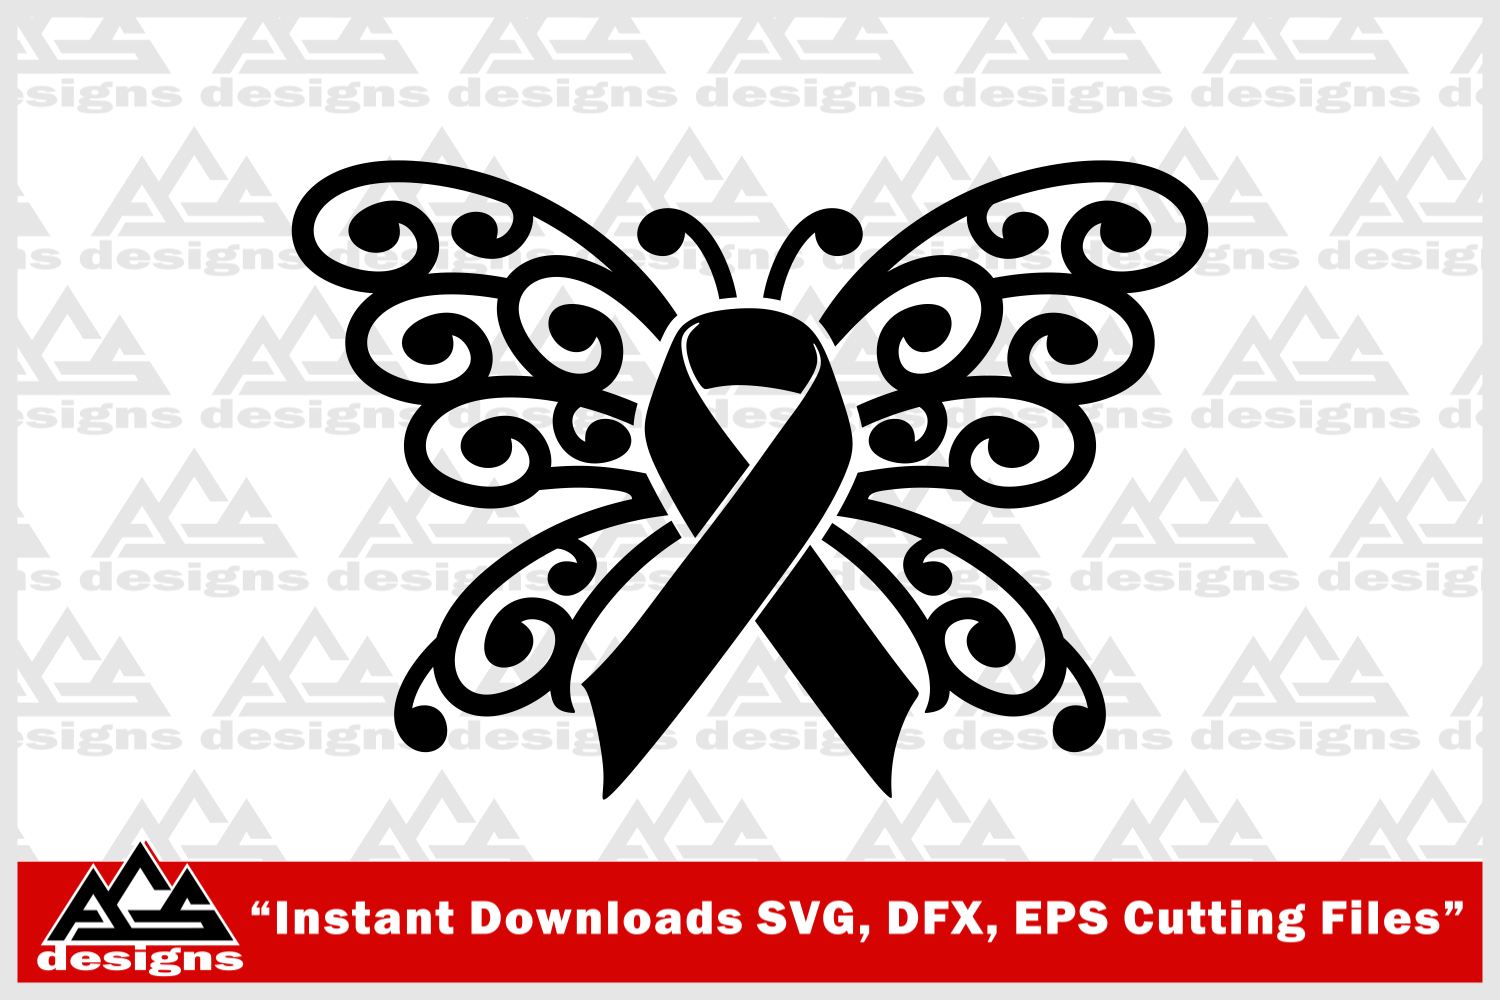 Butterfly Cancer Awareness Ribbon Svg Design By AgsDesign | TheHungryJPEG